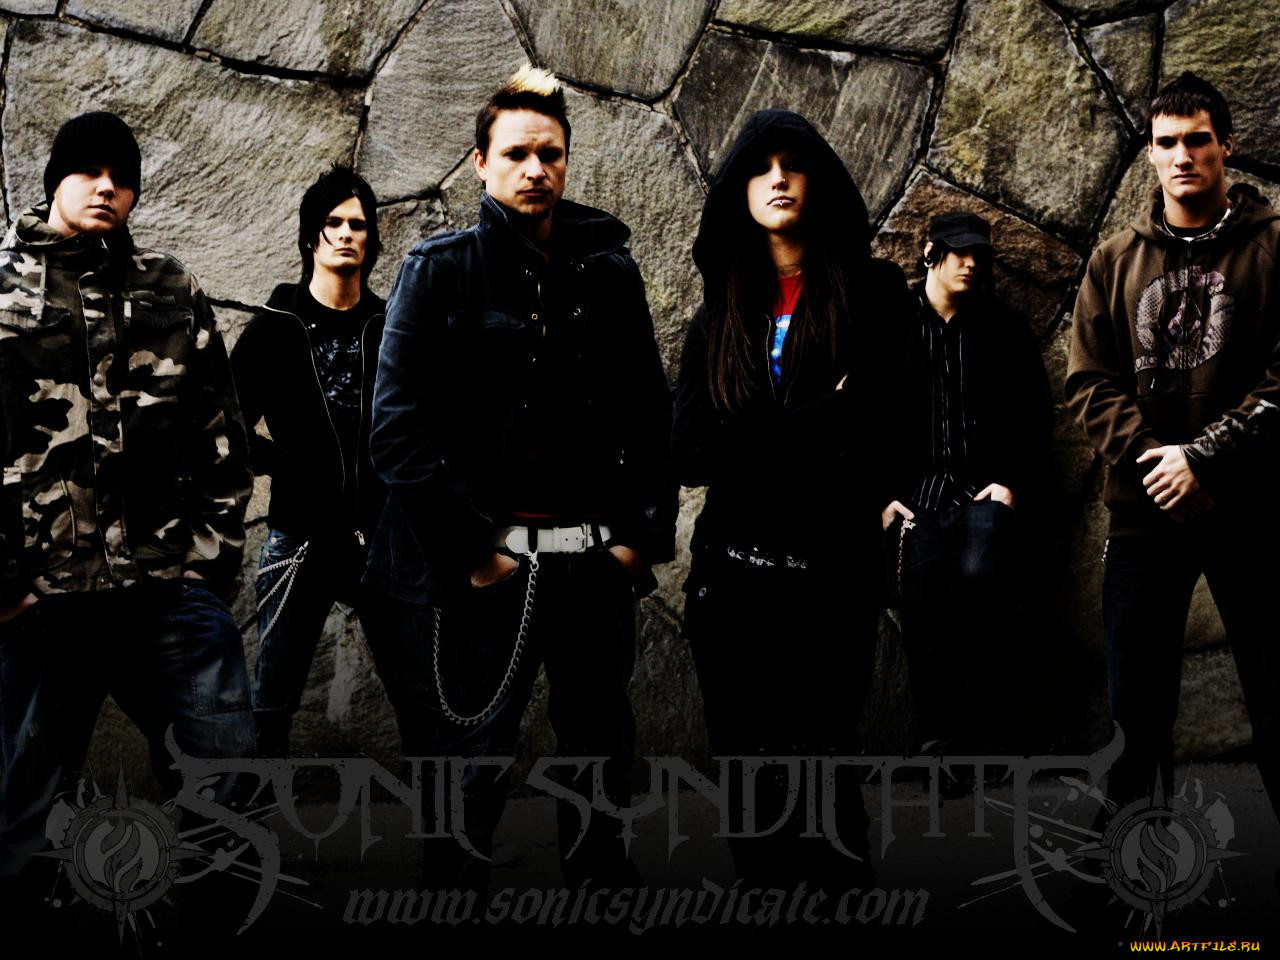 sonic, syndicate2, , syndicate